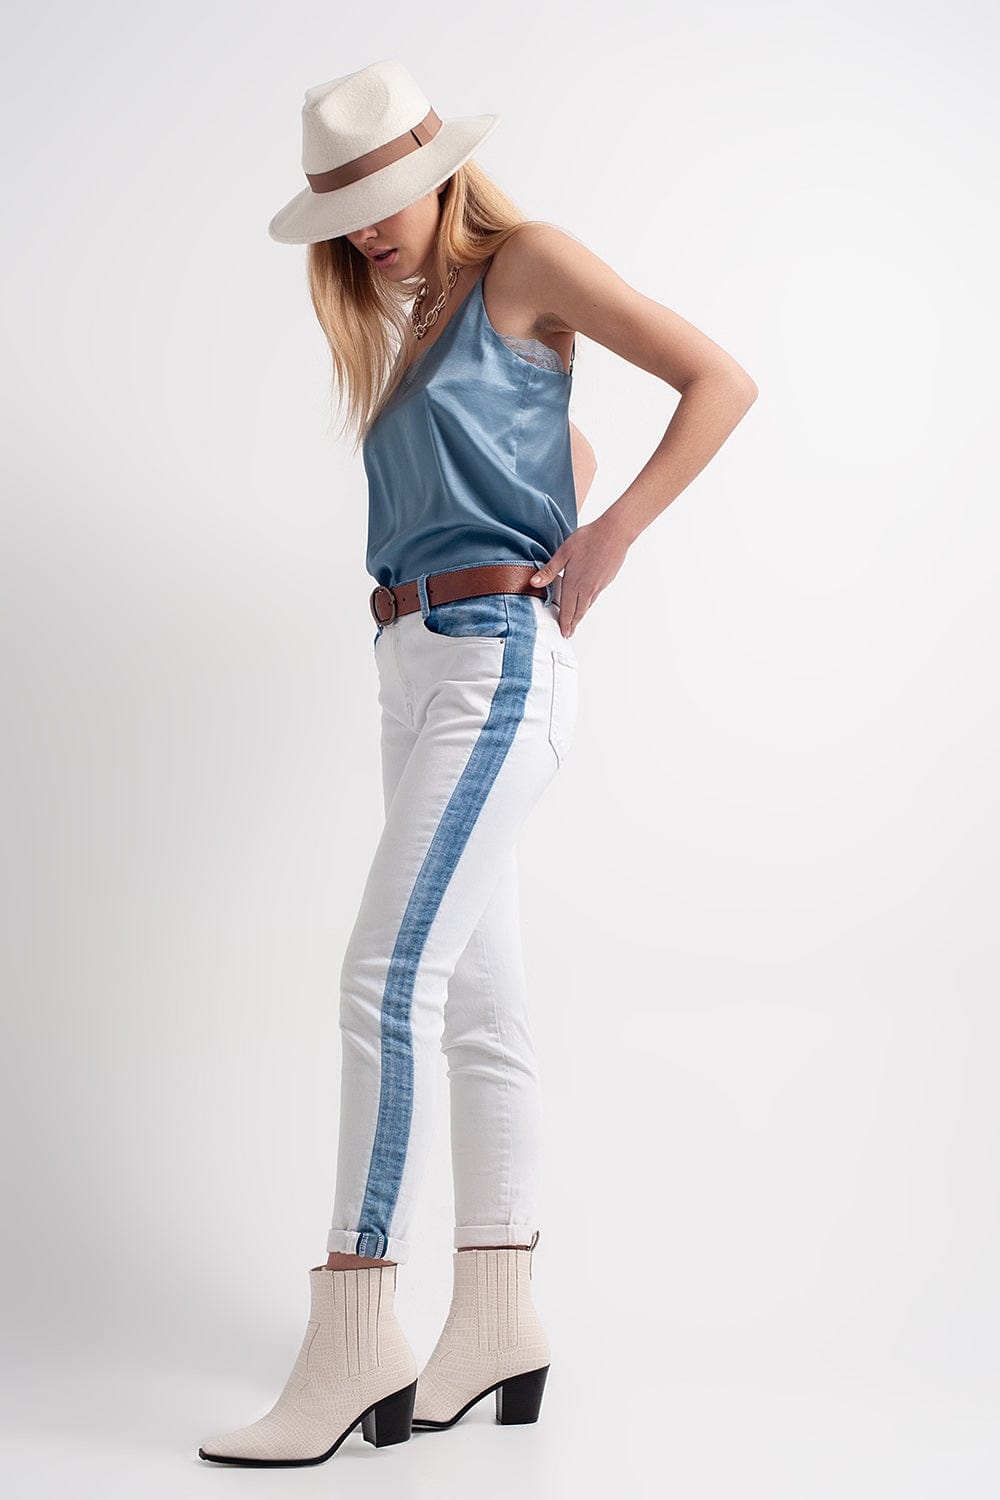 Q2 Women's Jean White Jeans with Contrast Panel in Light Wash